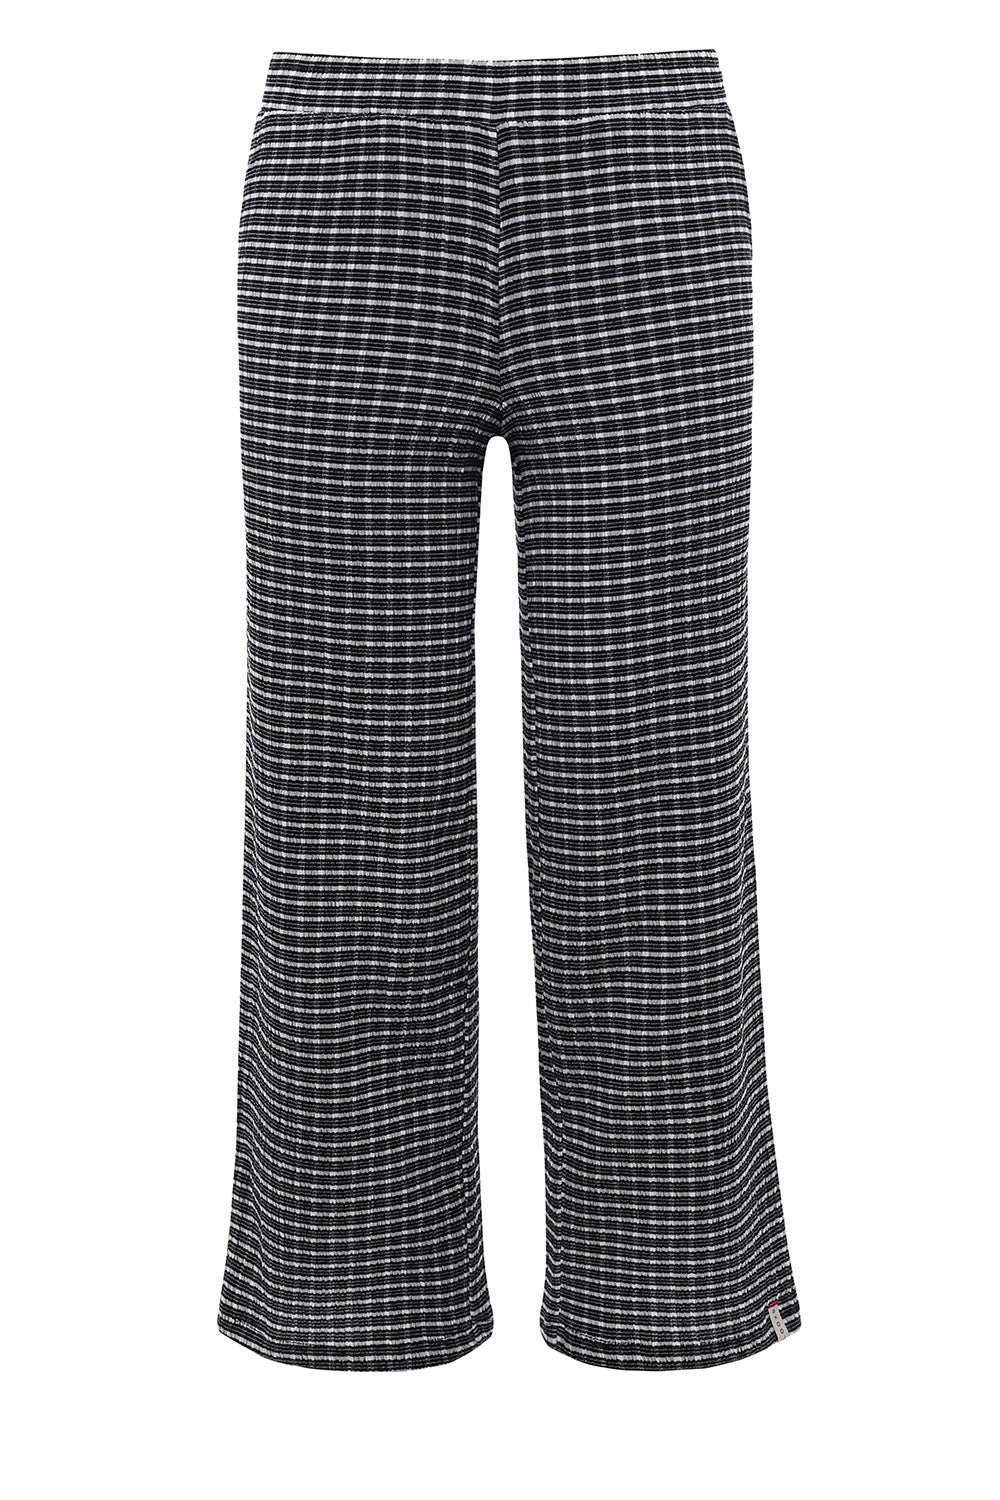 LOOXS 10sixteen  Check Crinkle Wide Pants